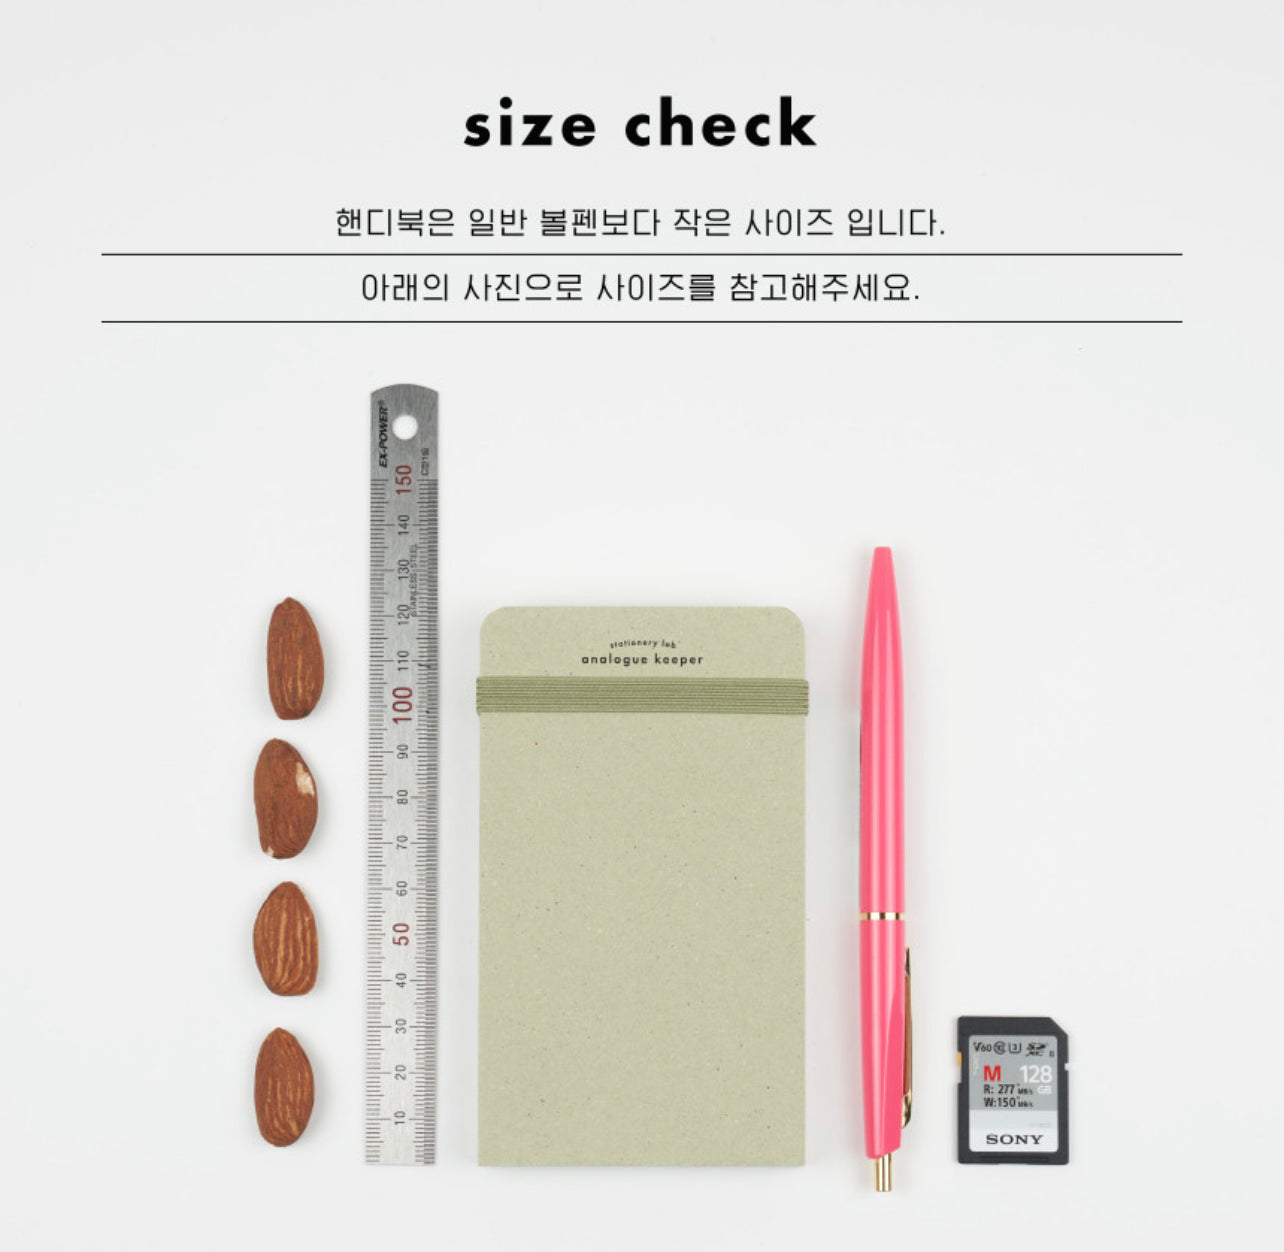 Analogue Keeper Handy Book NEW // 2 Colors